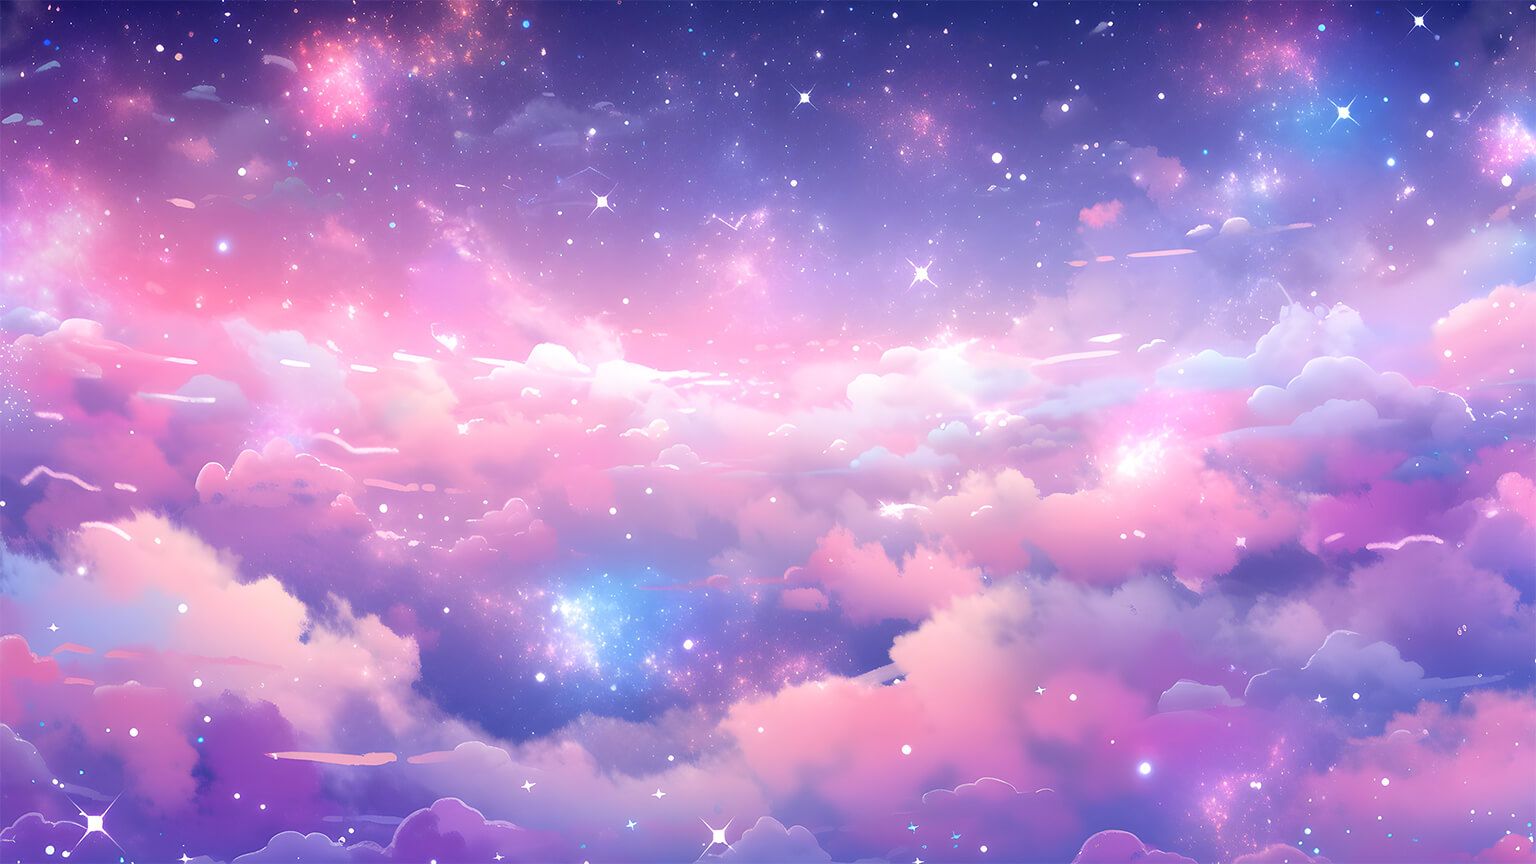 A pink and purple sky with clouds and stars - Desktop